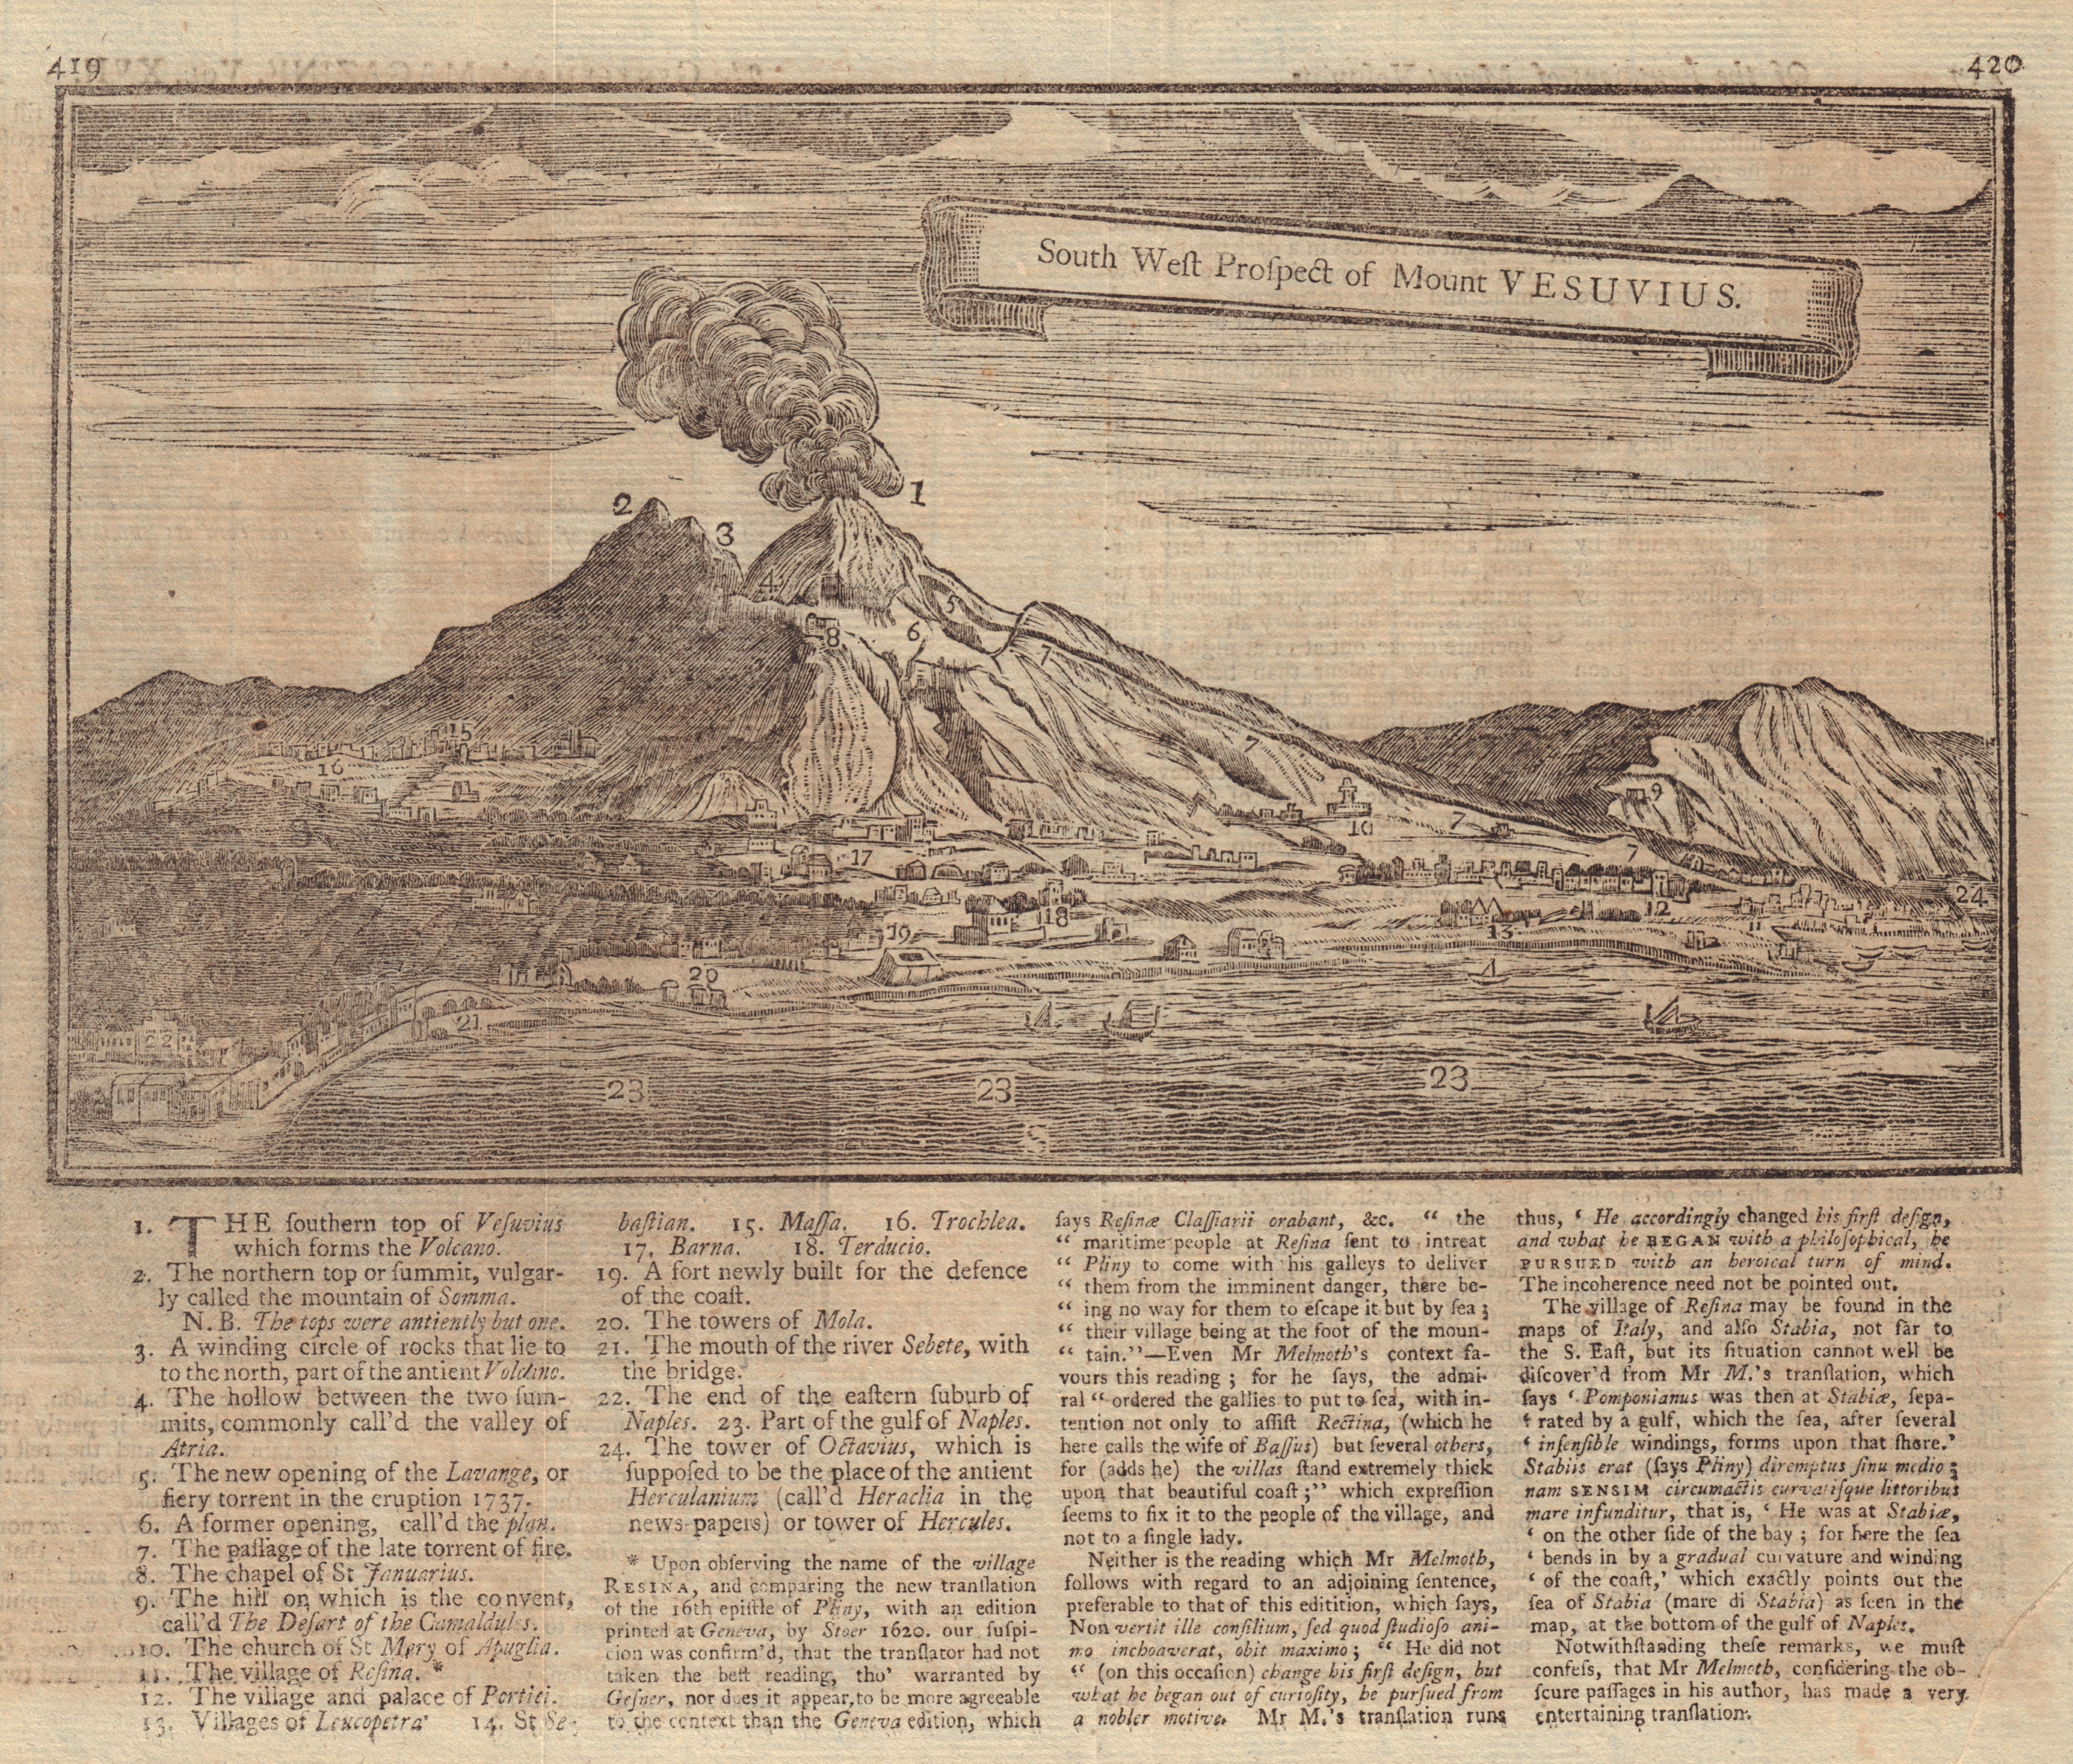 South West Prospect of Mount Vesuvius at the time of the explosion/eruption 1747